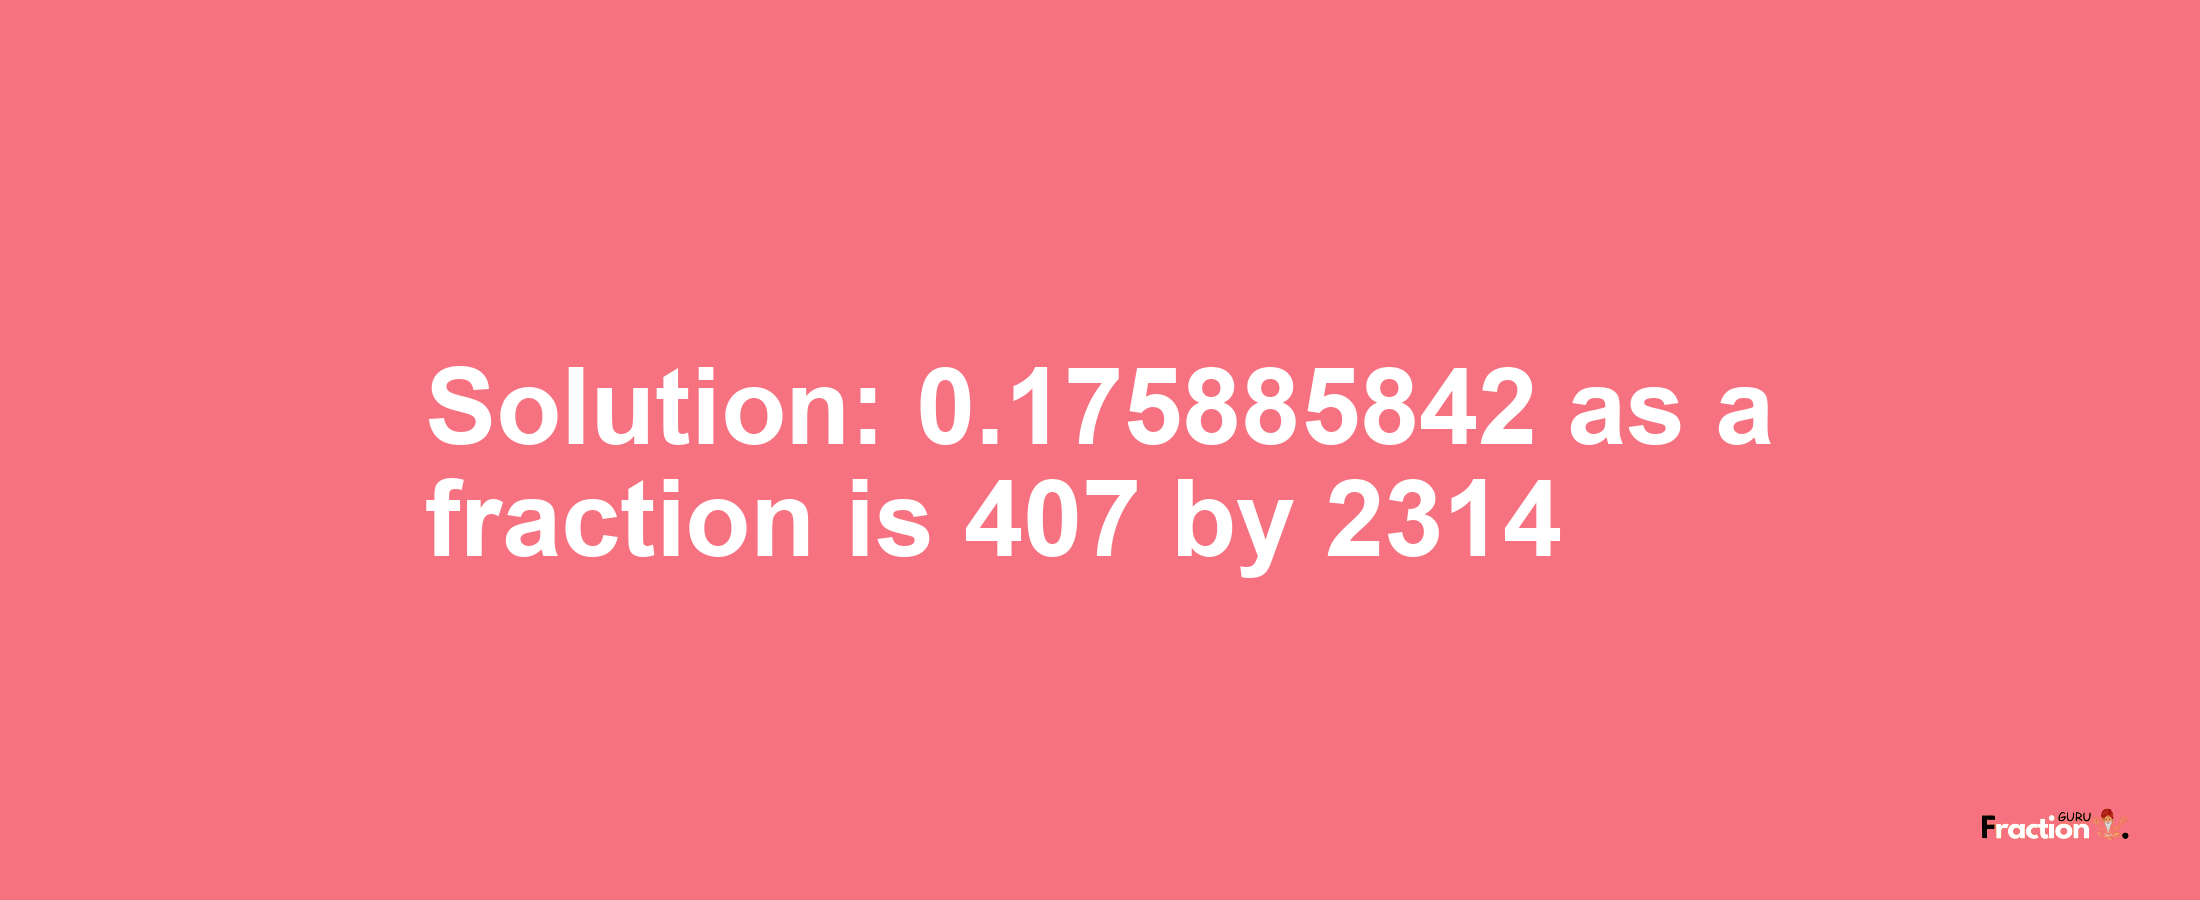 Solution:0.175885842 as a fraction is 407/2314